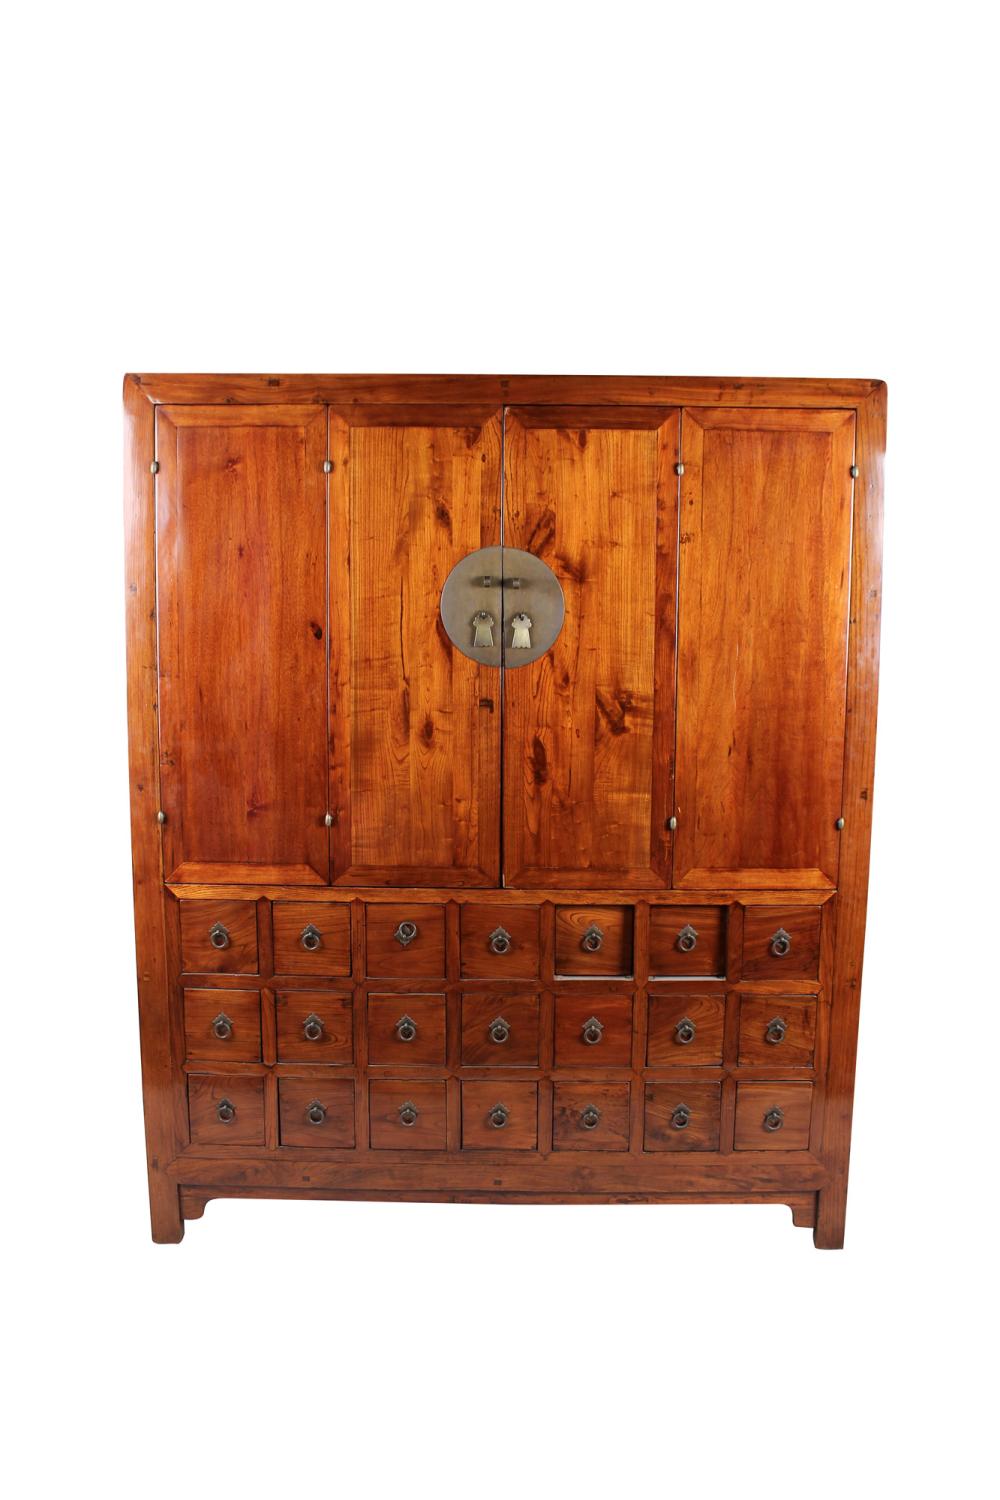 CHINESE HARDWOOD APOTHECARY CABINETwith 33628d